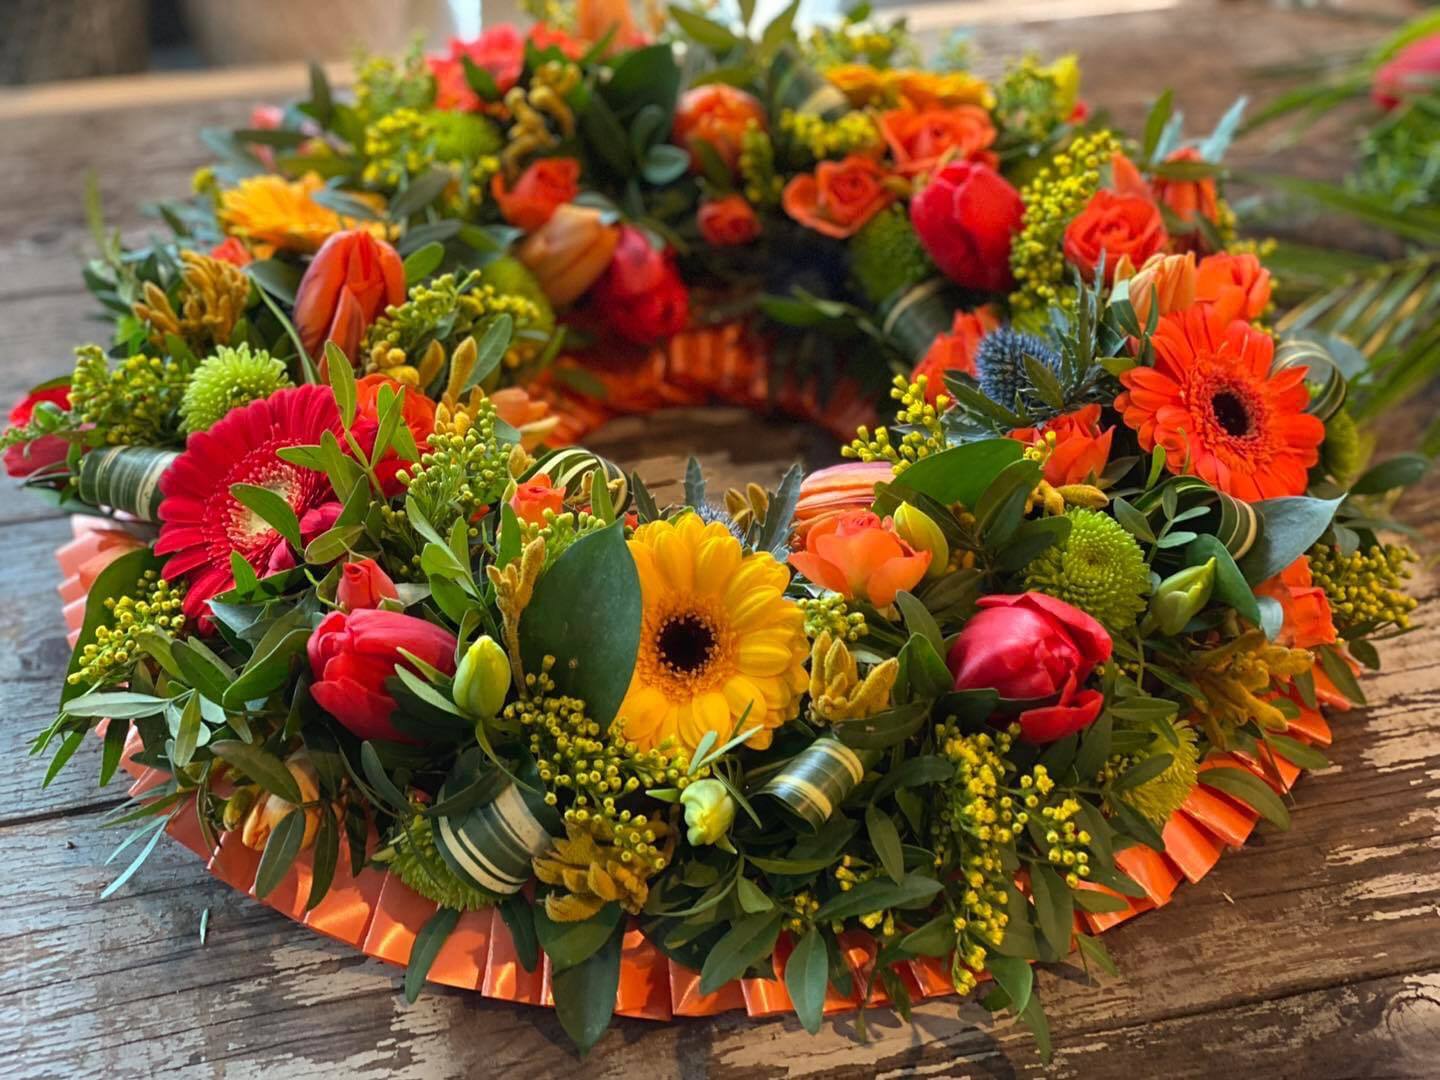 Paula will be running wreath making classes in the run up to Christmas